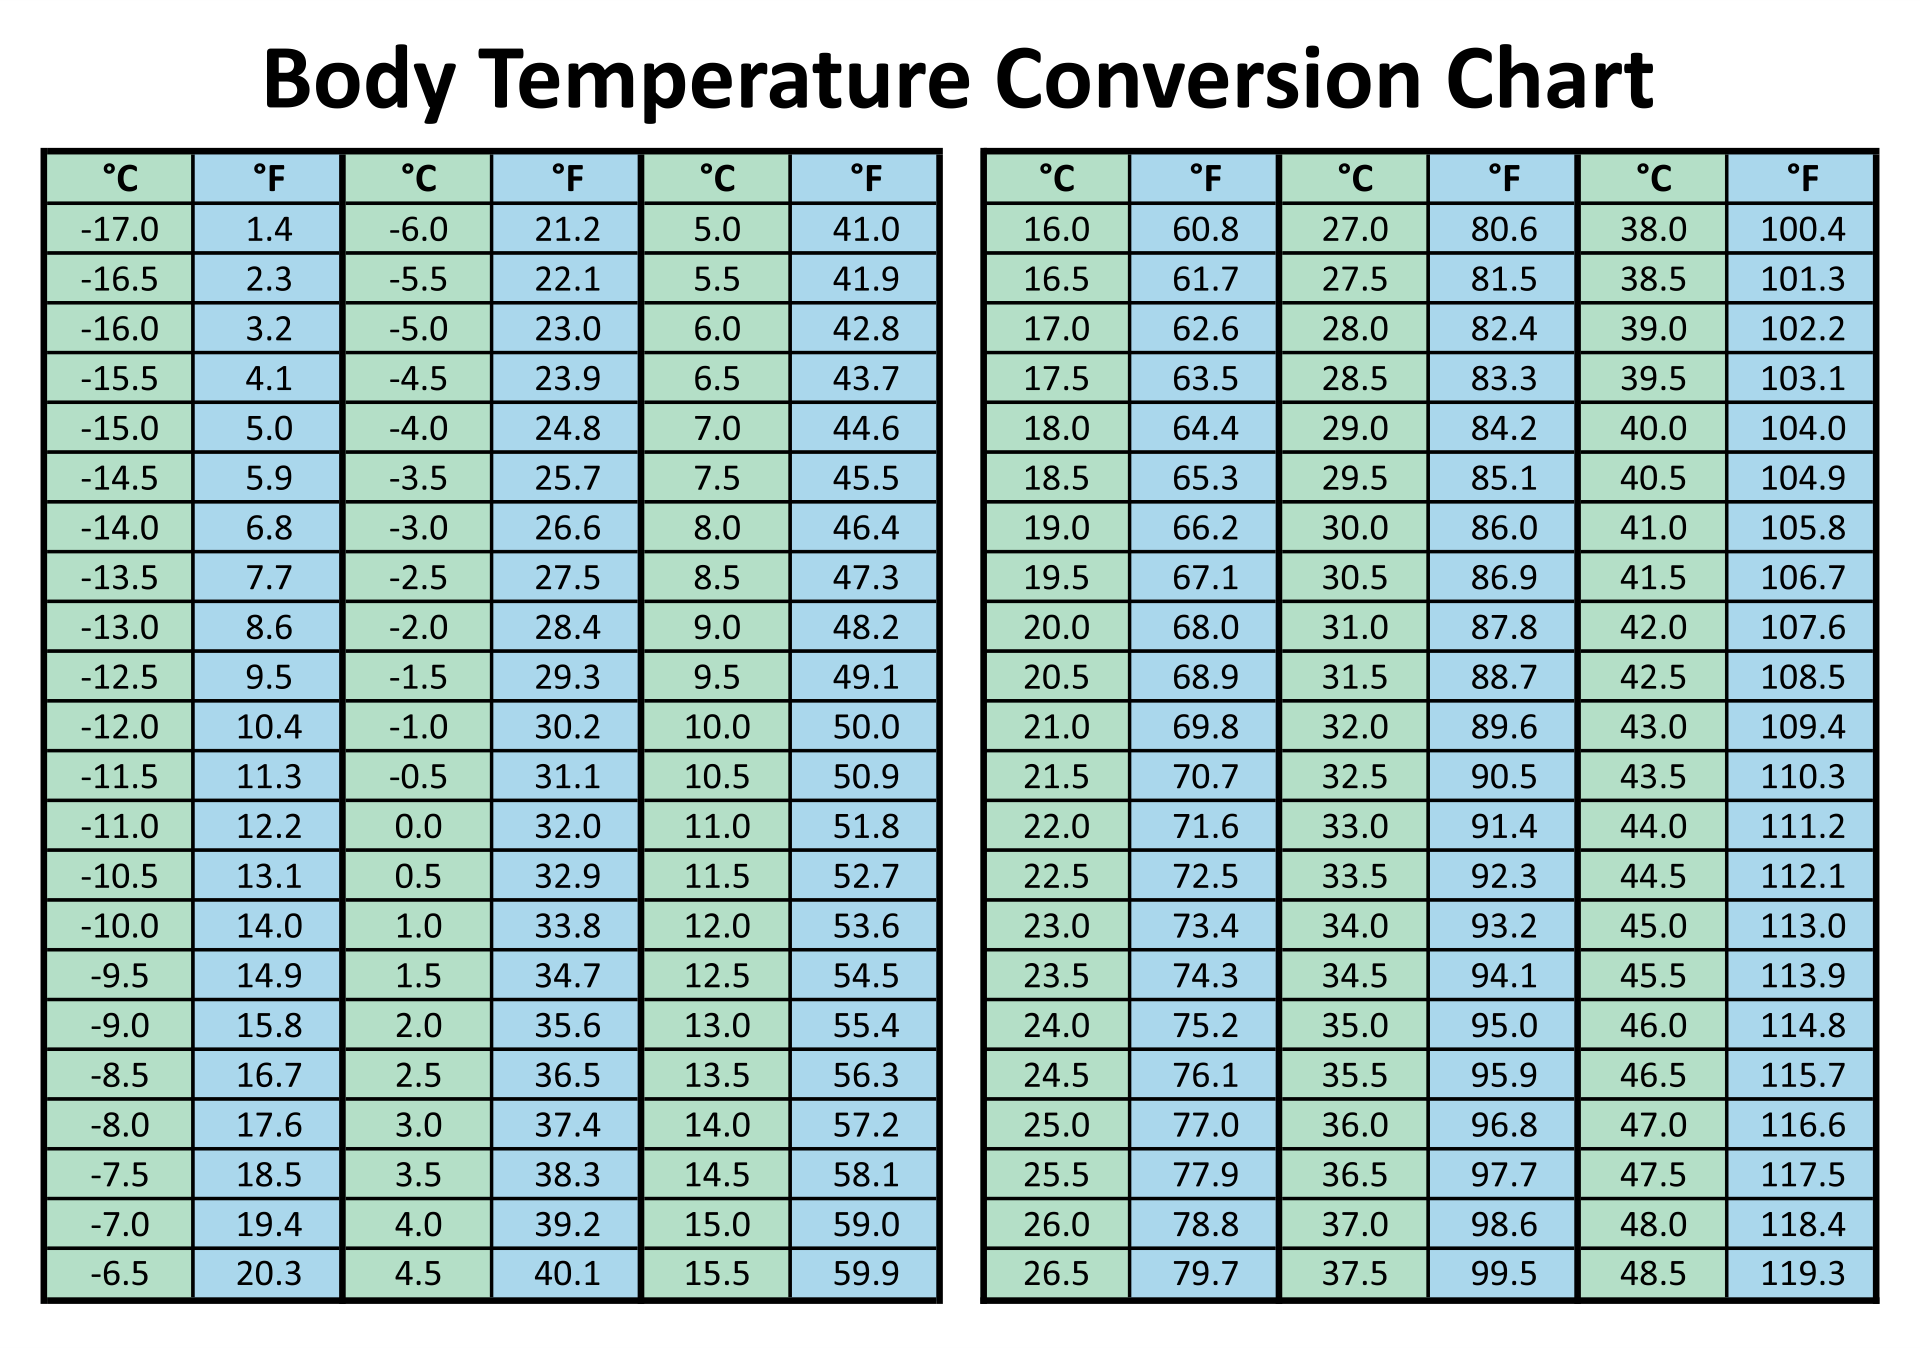 cooking time and temperature conversion calculator